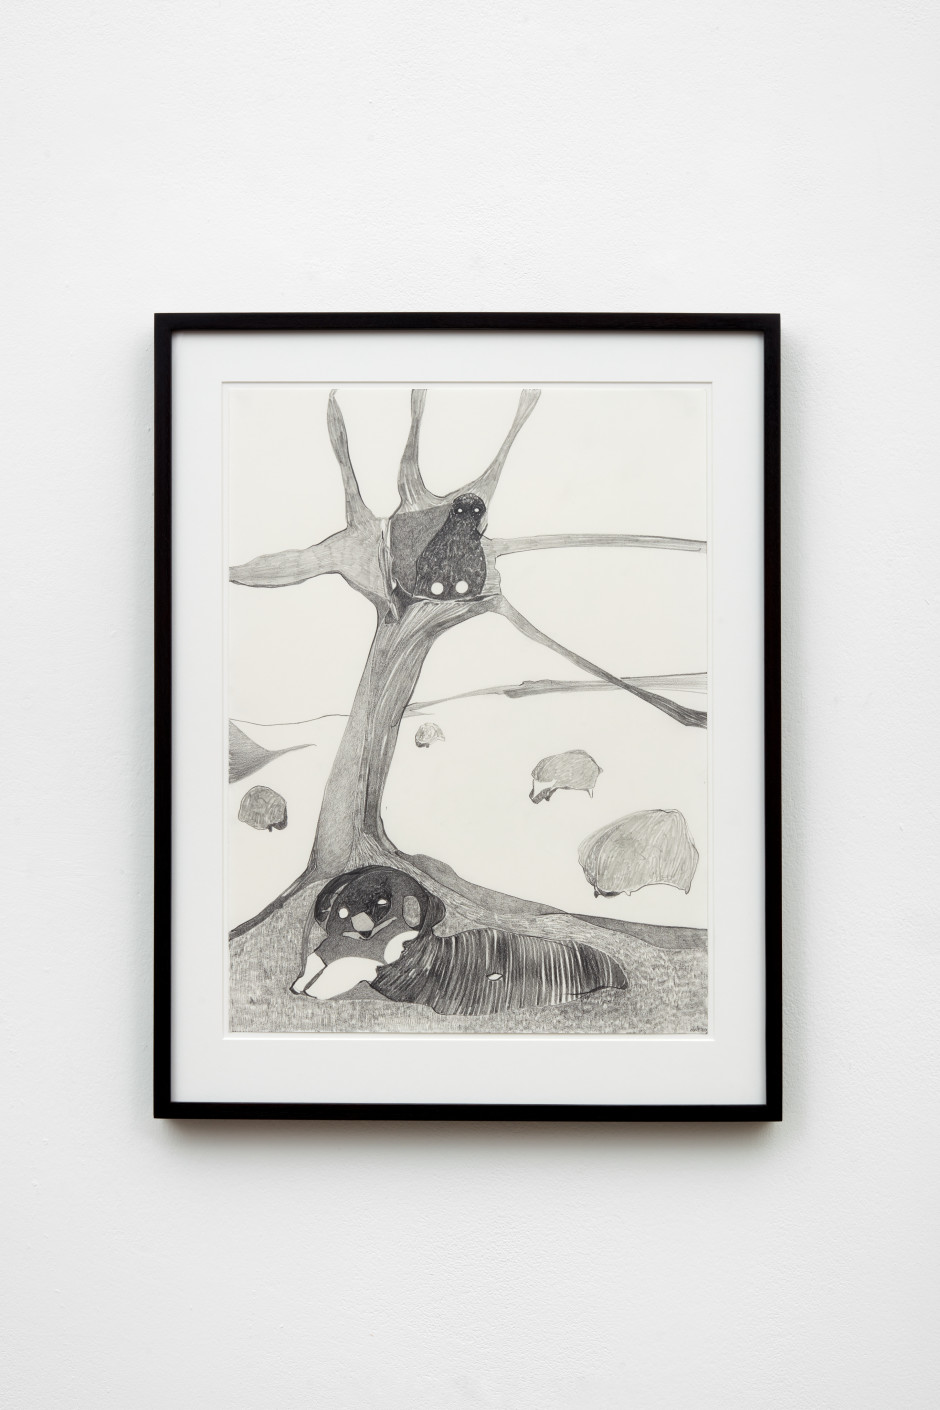 Reclining Figure, 2020  graphite on paper  site size: 50.8 x 37.5 cm / 20 x 14 ¾ in frame size: 63.5 x 49 x 3.8 cm / 25 x 19 ¼ x 1 ½ in